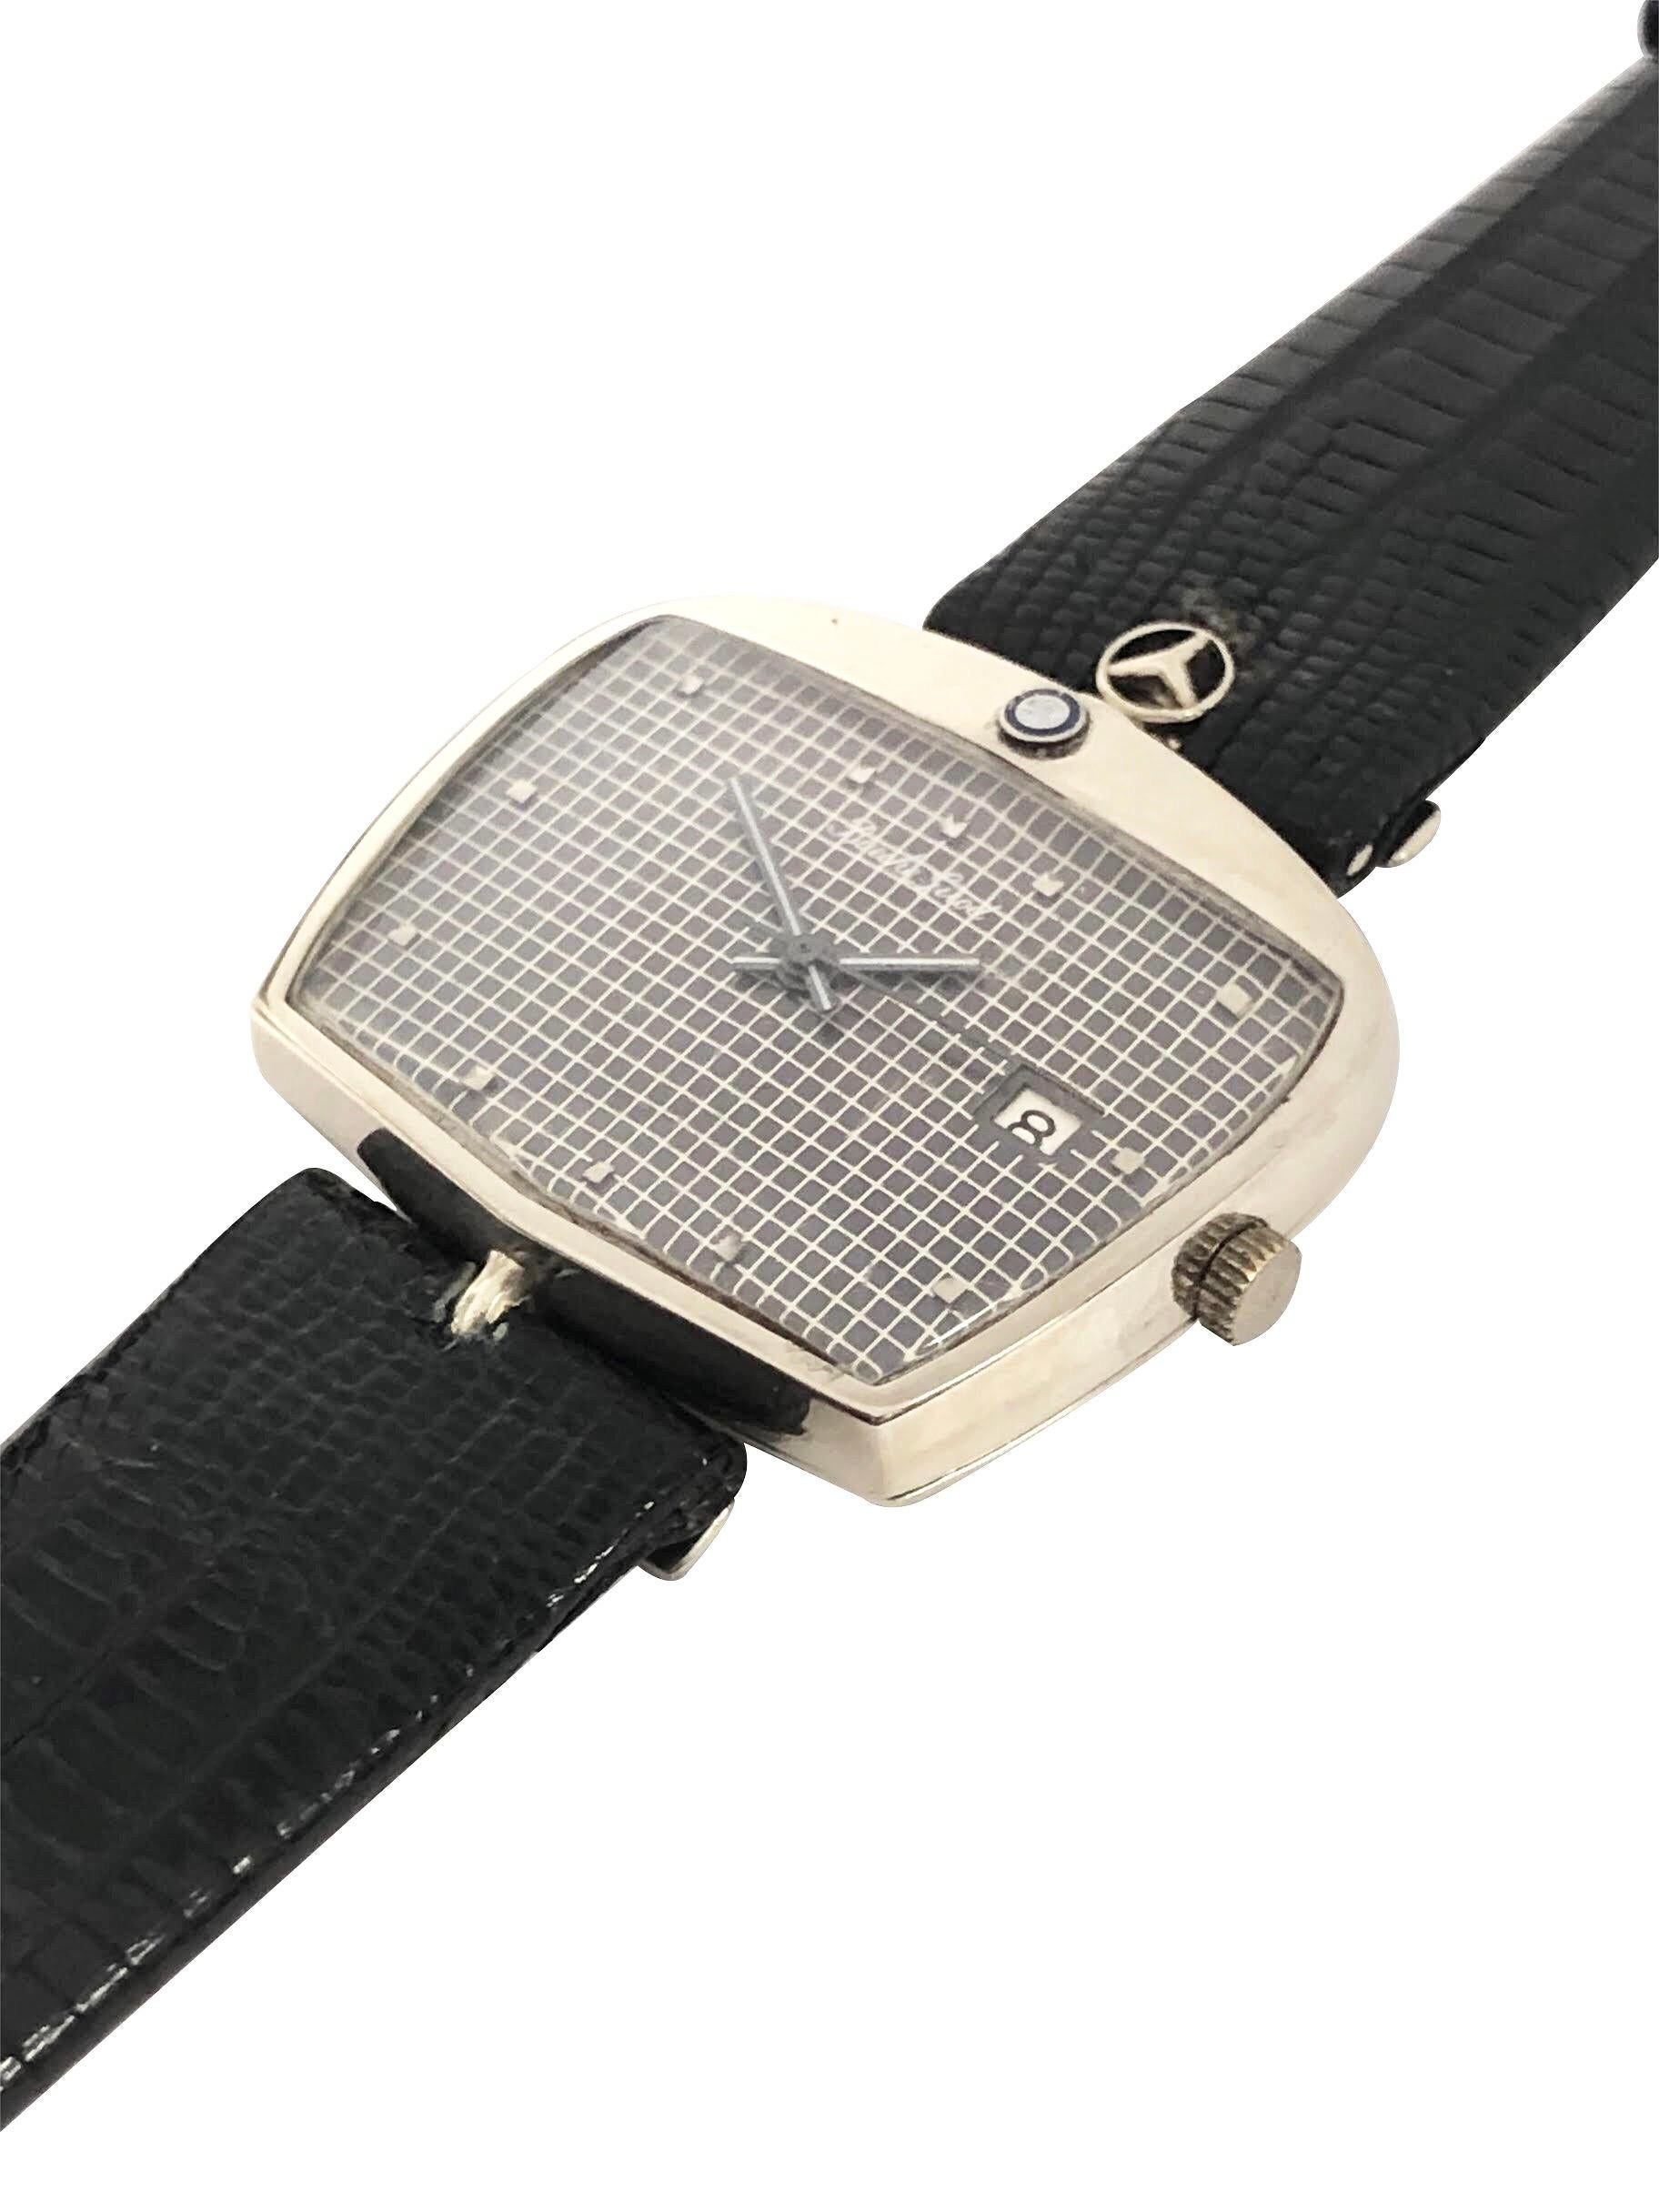 Circa 1970s Bueche Girod Extremely Rare Mercedes Benz Wrist Watch,  18K White Gold 29 X 37 M.M. X 8 M.M. thick 2 Piece Mercedes Benz Car Grill shape case with hood ornament. 17 Jewel Automatic, Self winding movement. Gray dial with Cross Hatch